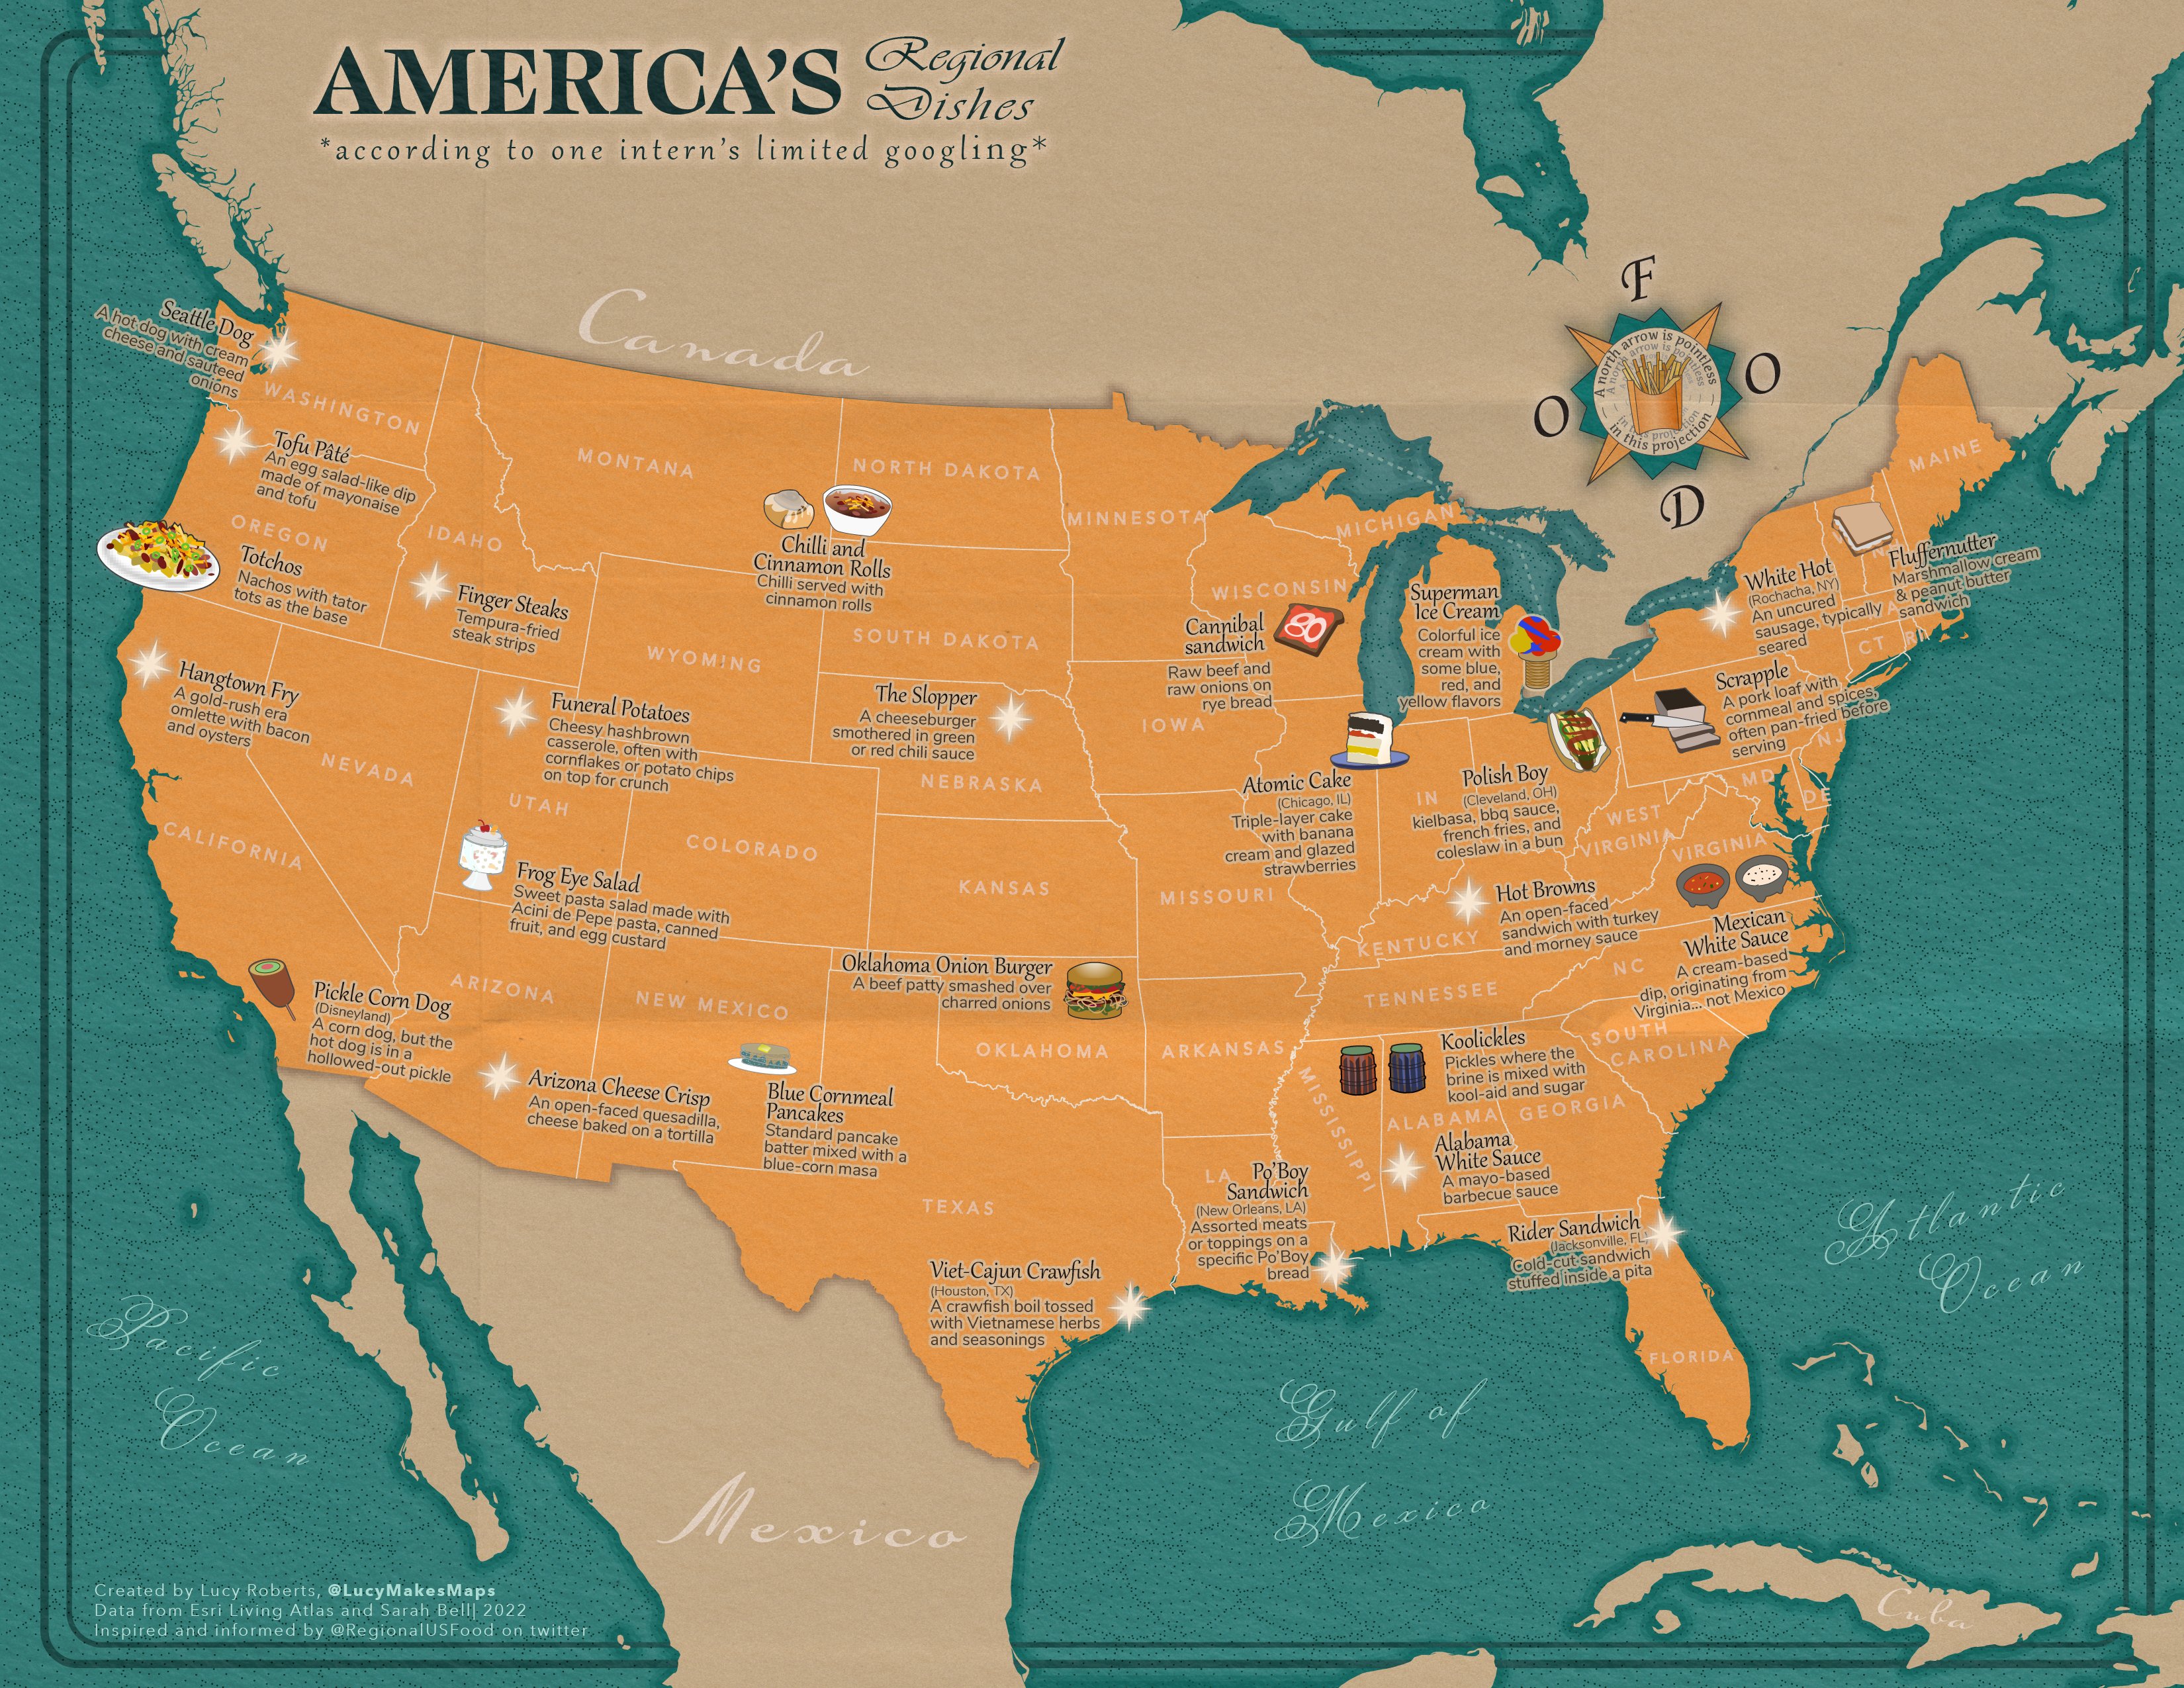 A map of the US showing American Regional Dishes. The US stands in a stark orange against a bright teal ocean.